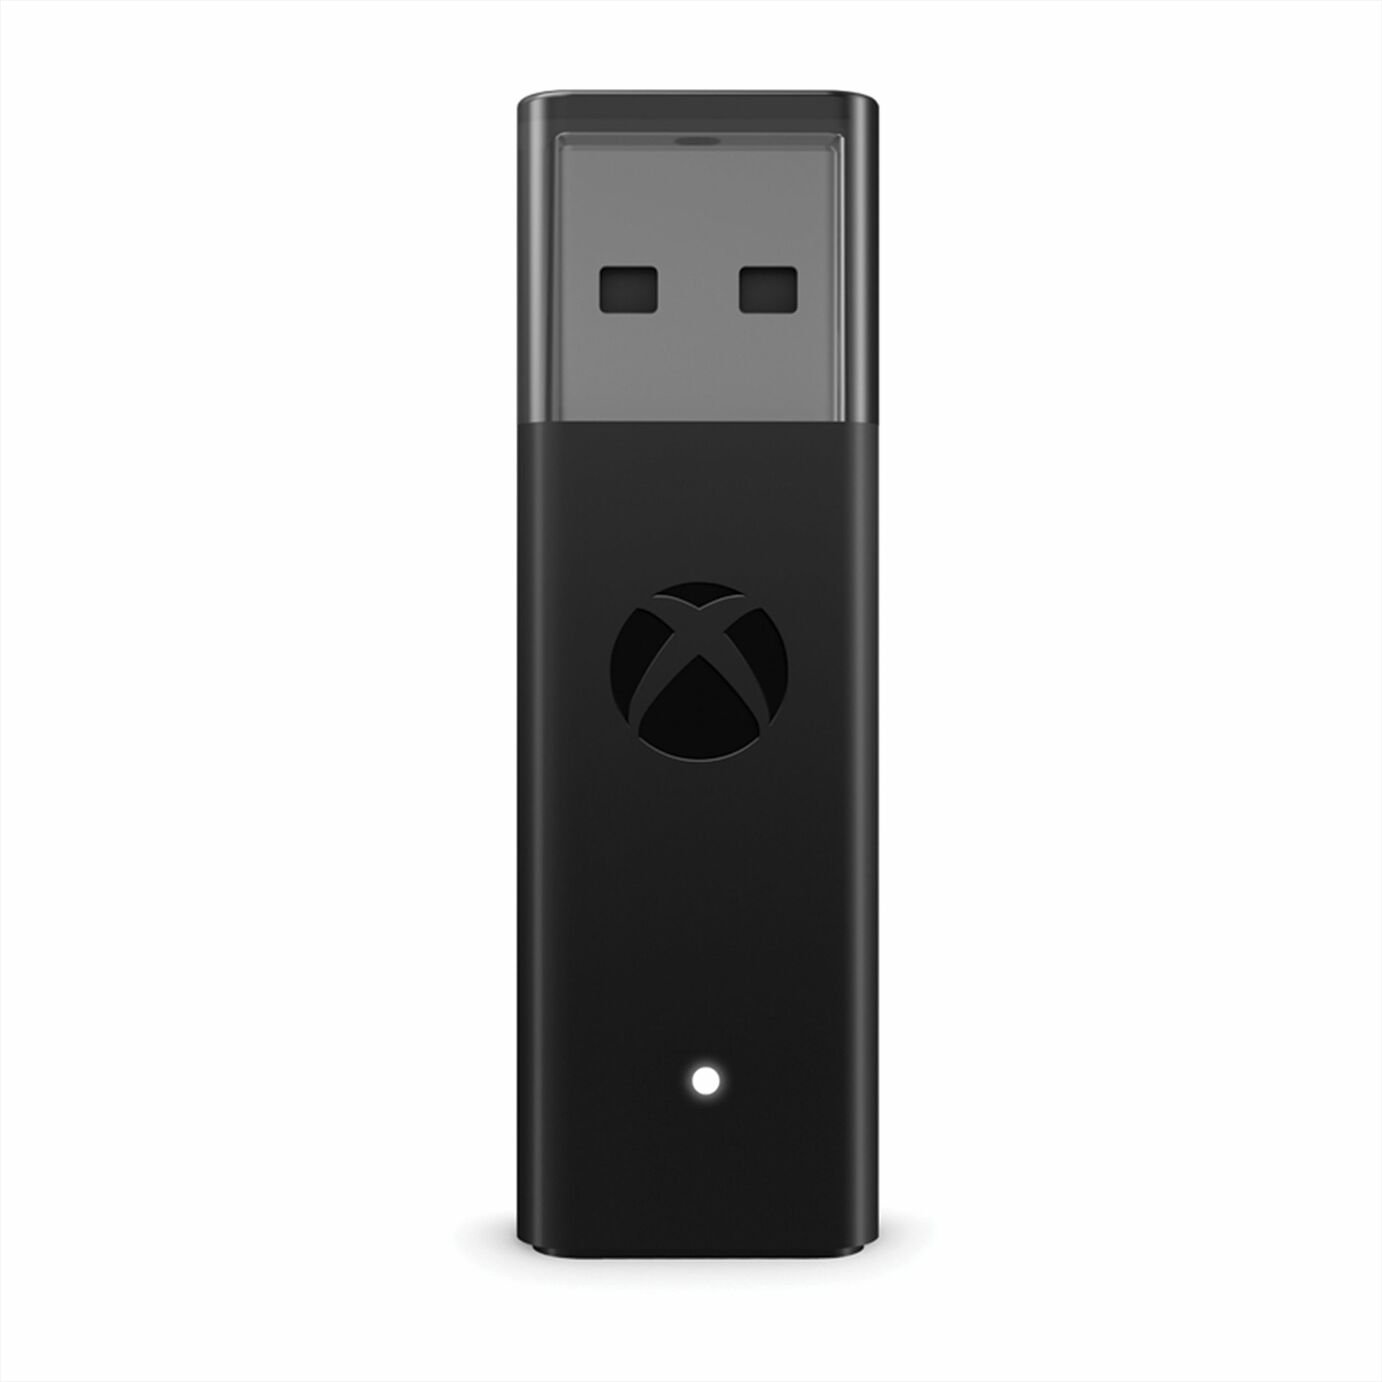 Xbox Wireless Adapter for Windows 10 Review